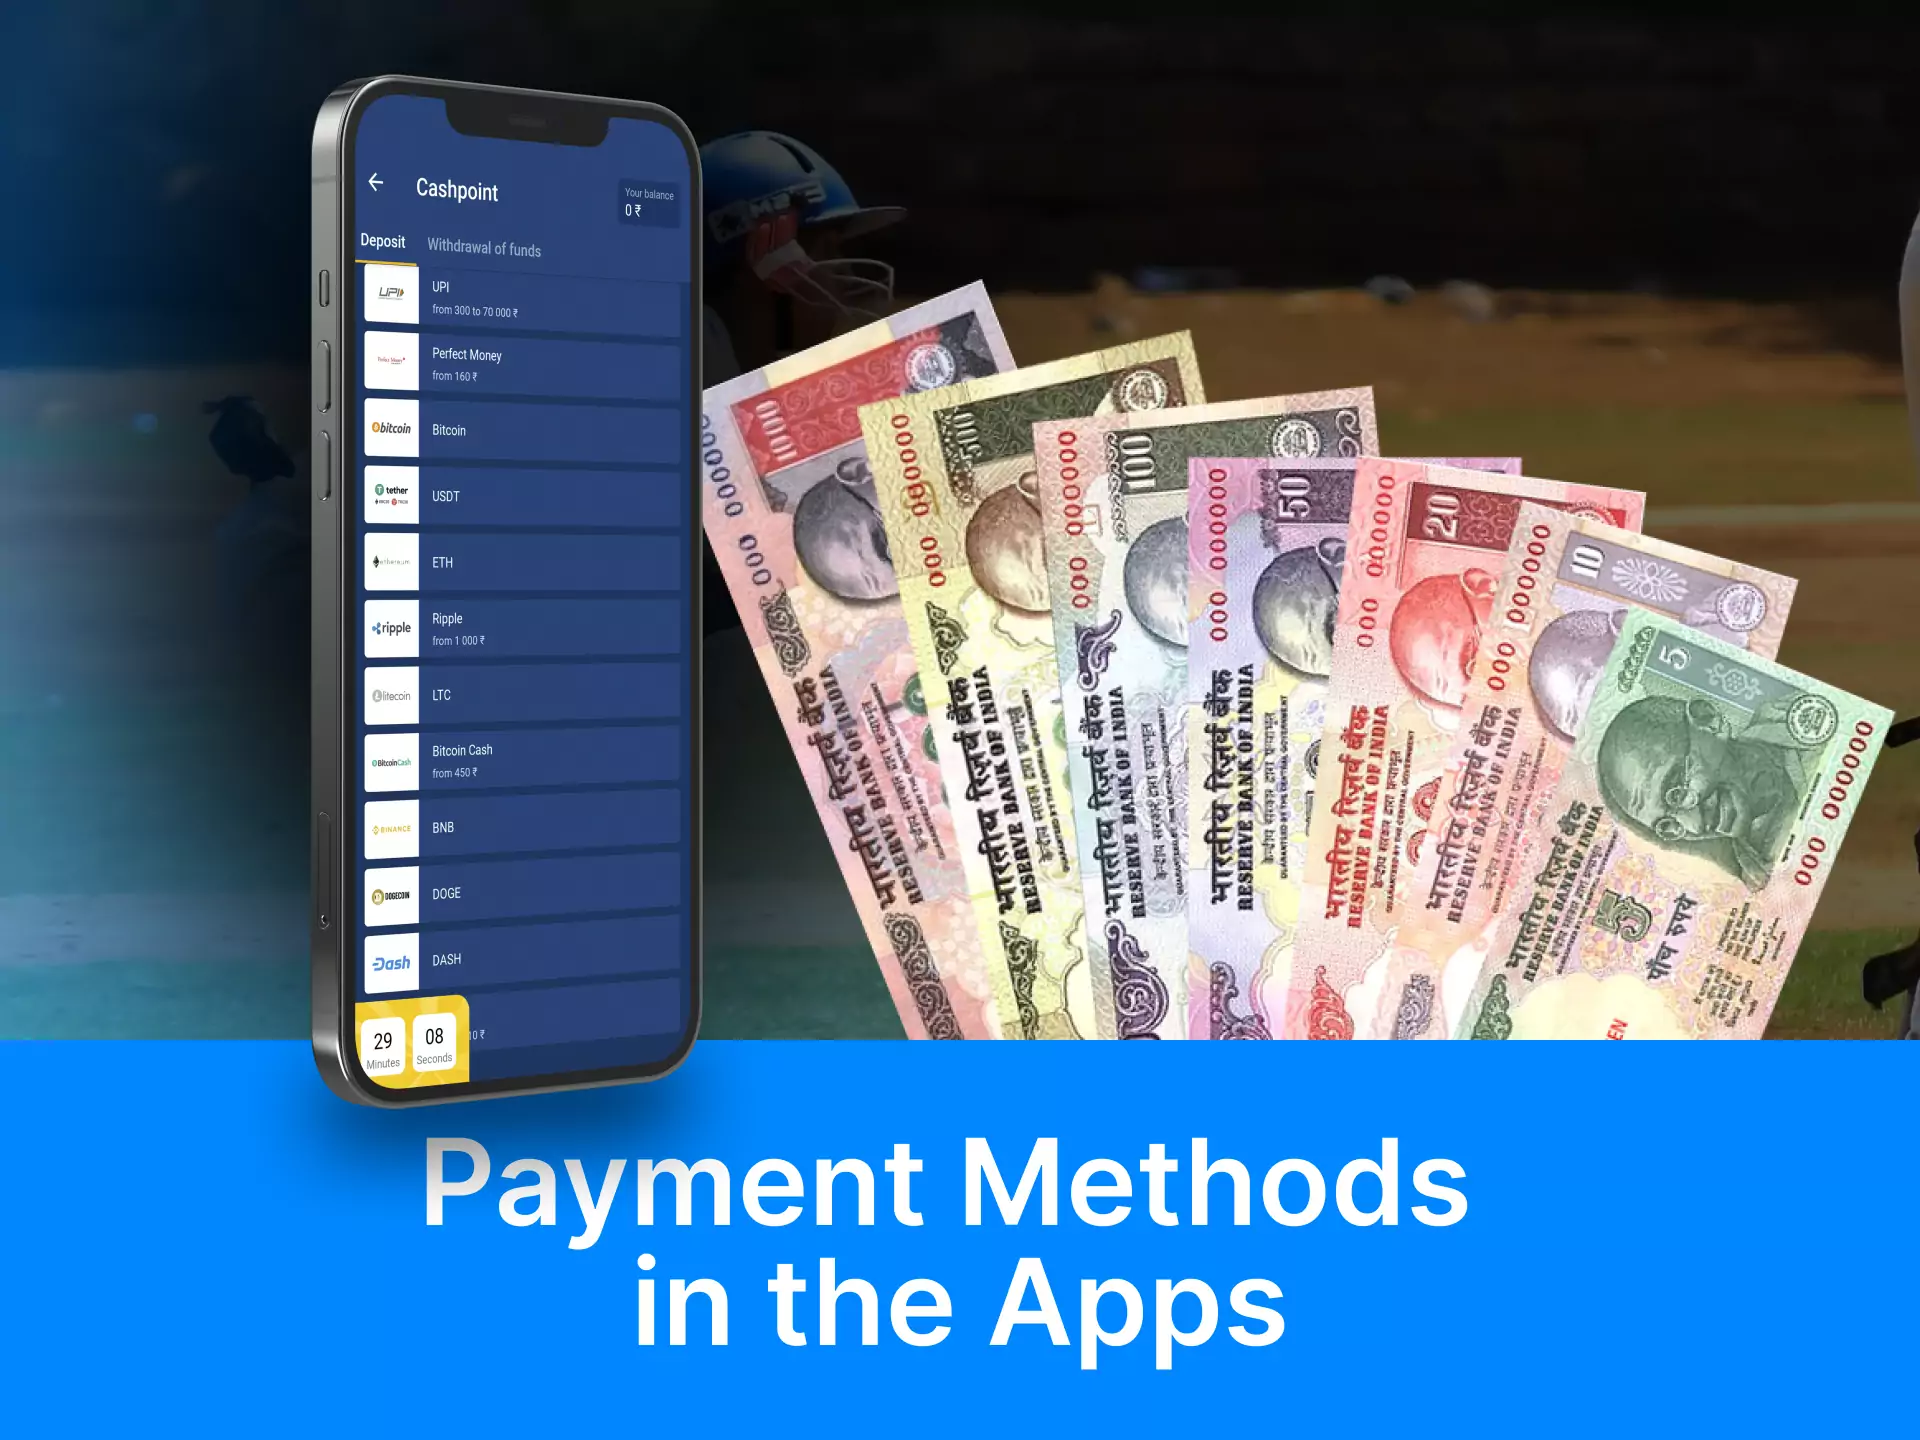 You can manage your deposits and withdrawals in apps.